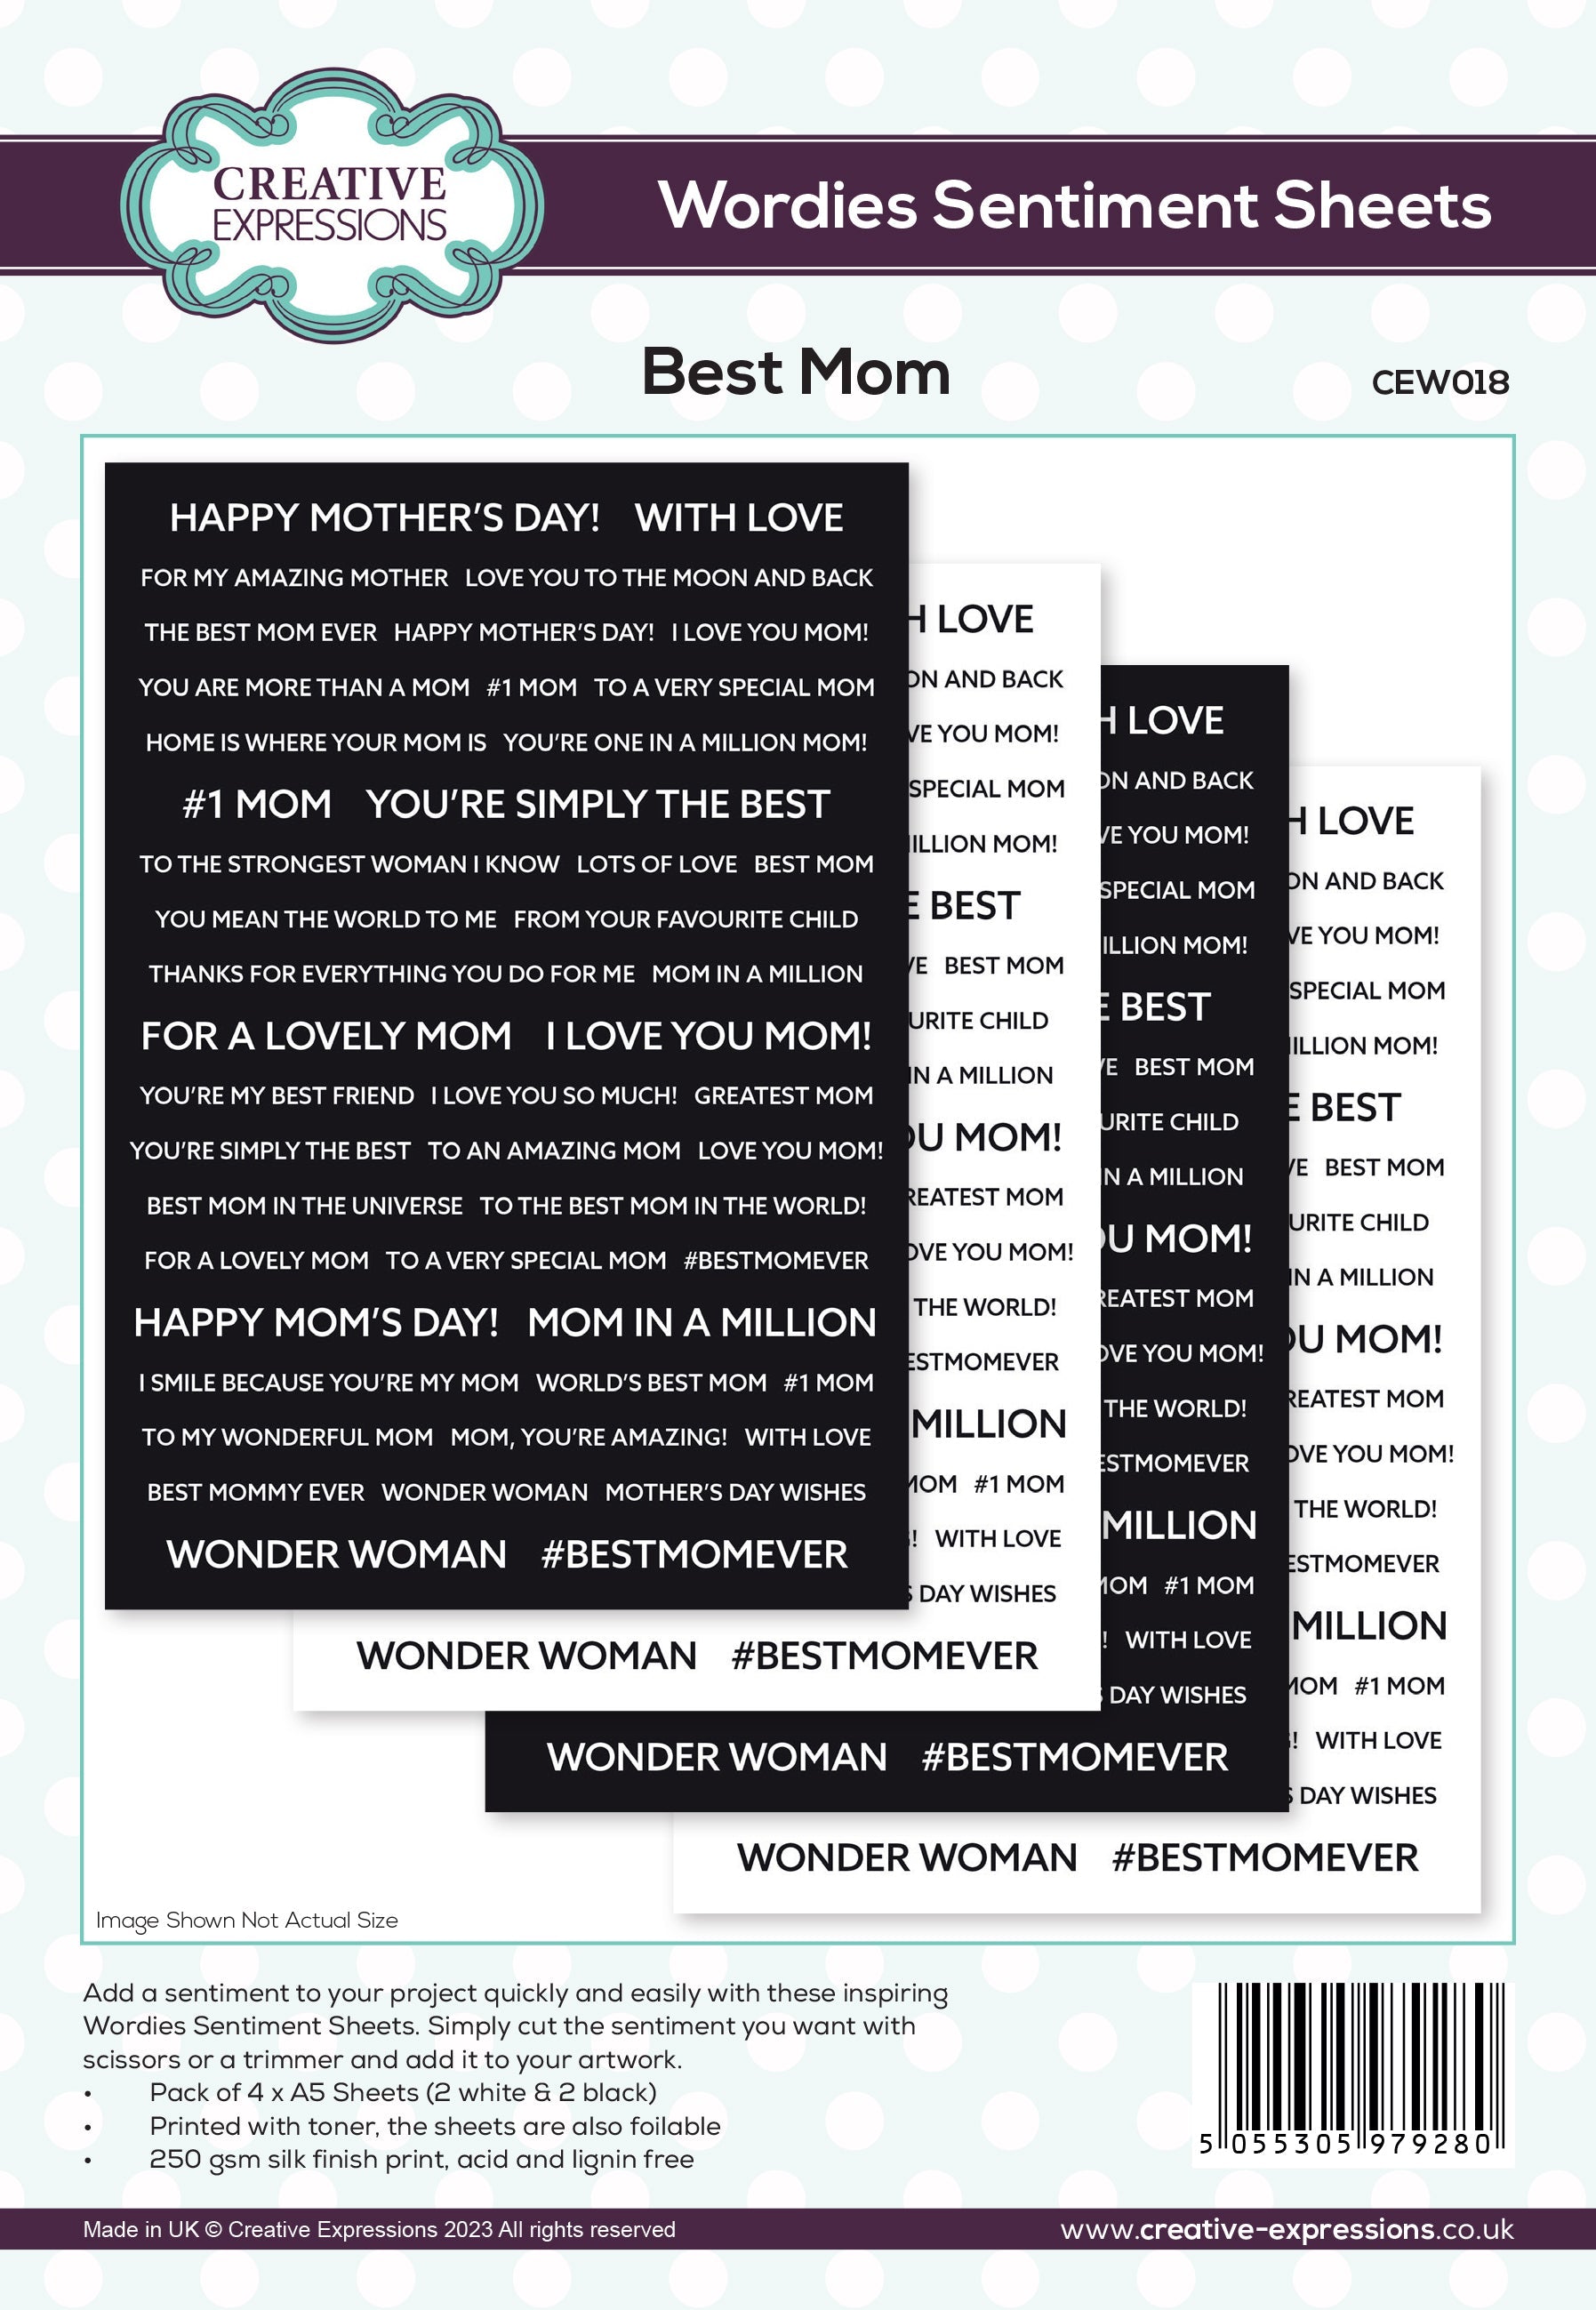 Creative Expressions Wordies Sentiment Sheets - Best Mom Pk 4 6 in x 8 in